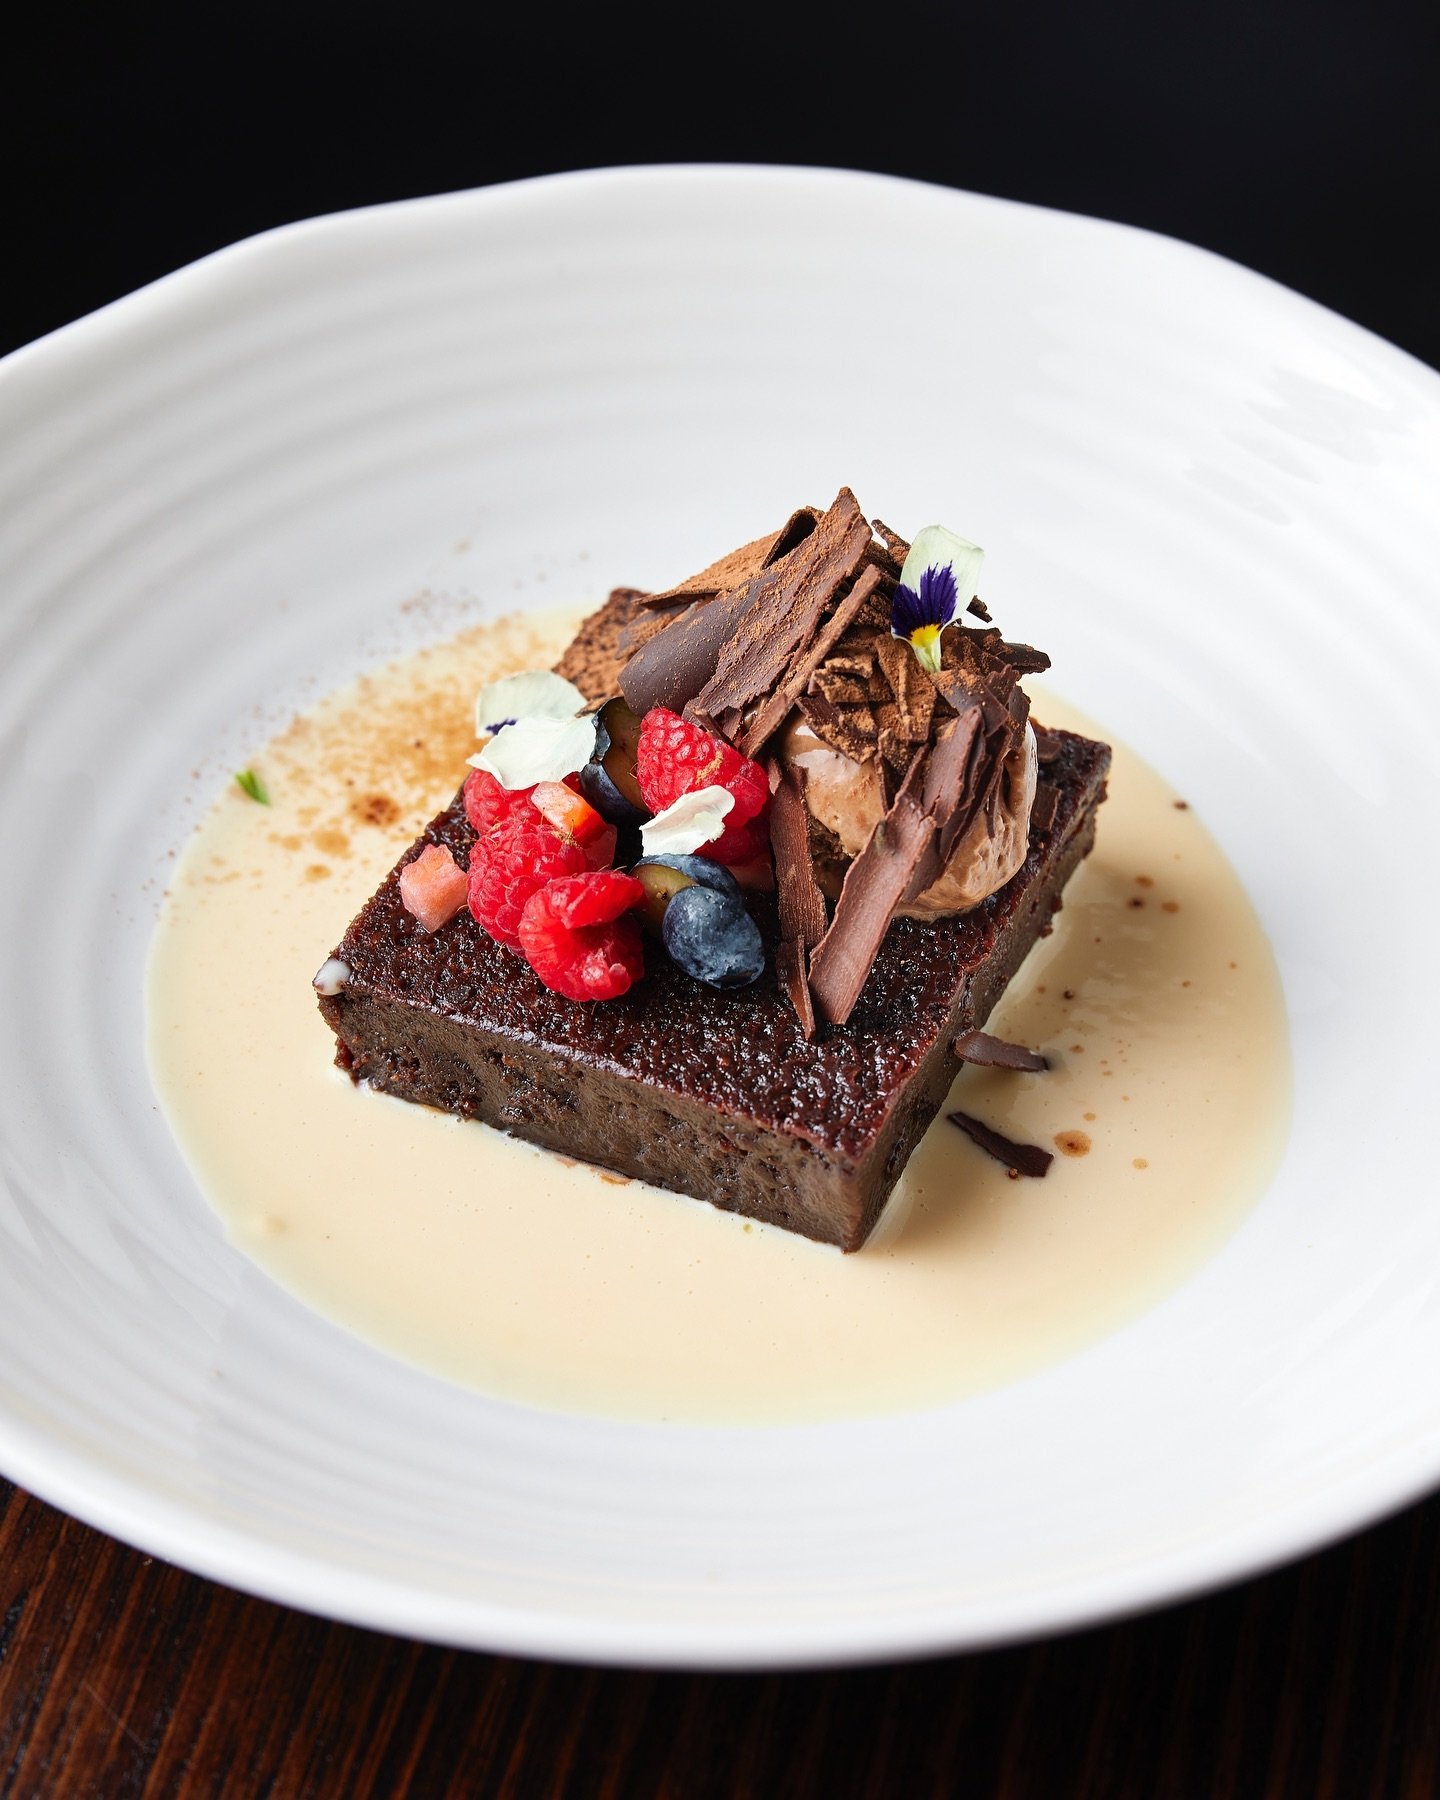 End your meal on a sweet note and order the Fosh chocolate cake.
Served with chocolate mousse and rum anglaise, this decadent dessert will be one you don&rsquo;t want to skip.

www.foshportside.com.au/bookings for reservations or call us on (07) 3211